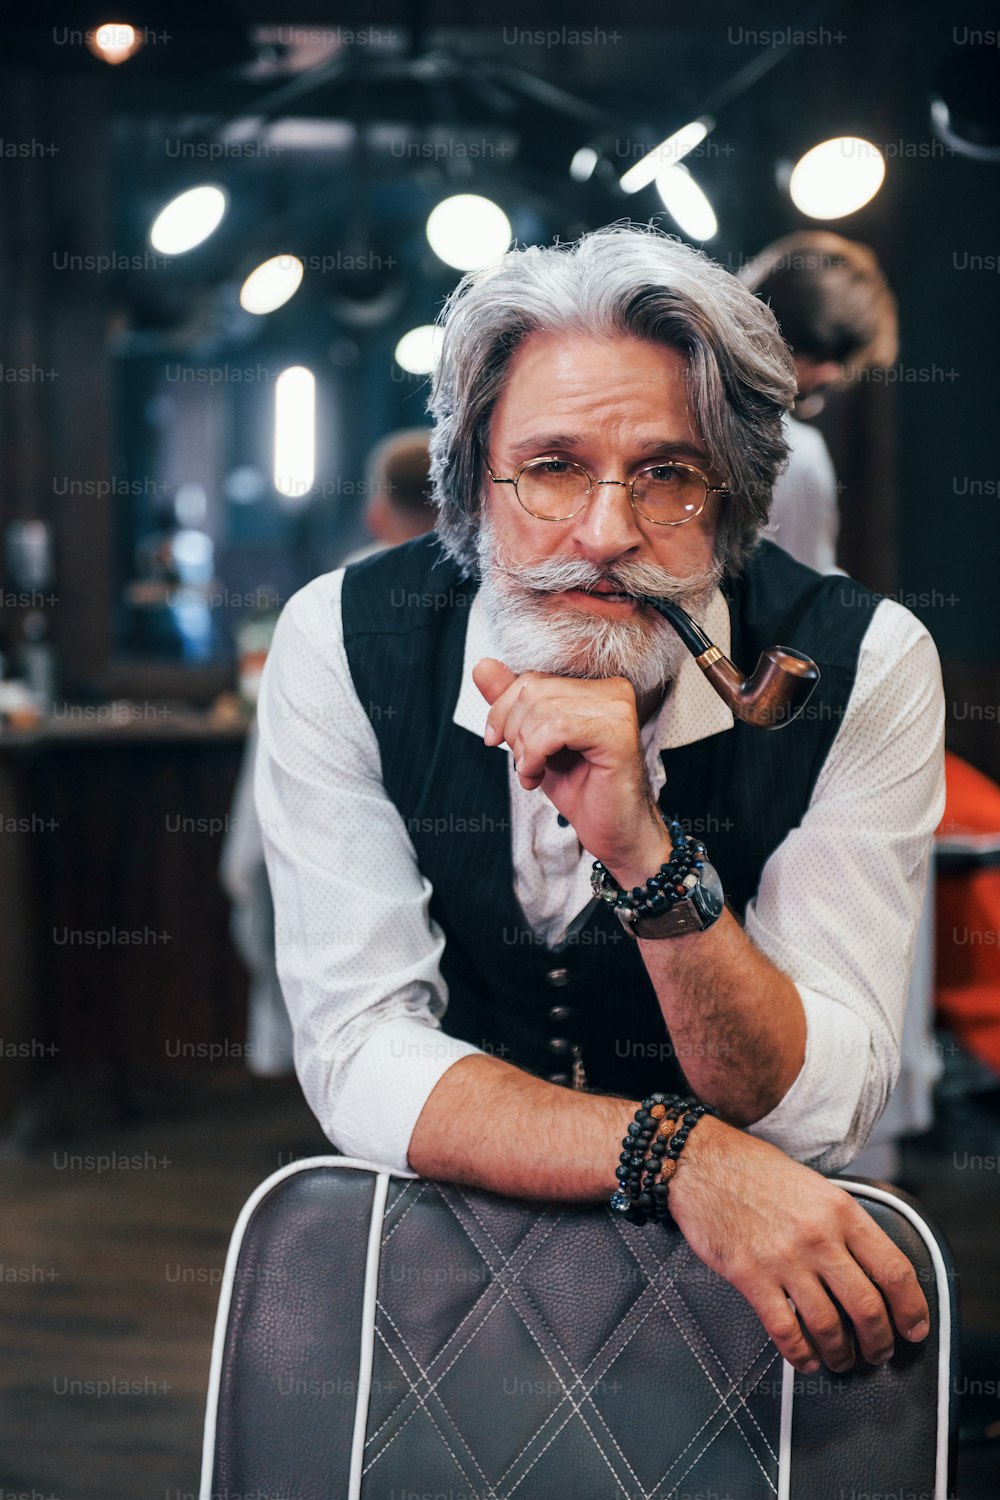 In retro clothes in barbershop. Stylish modern senior man with gray hair and beard is indoors.